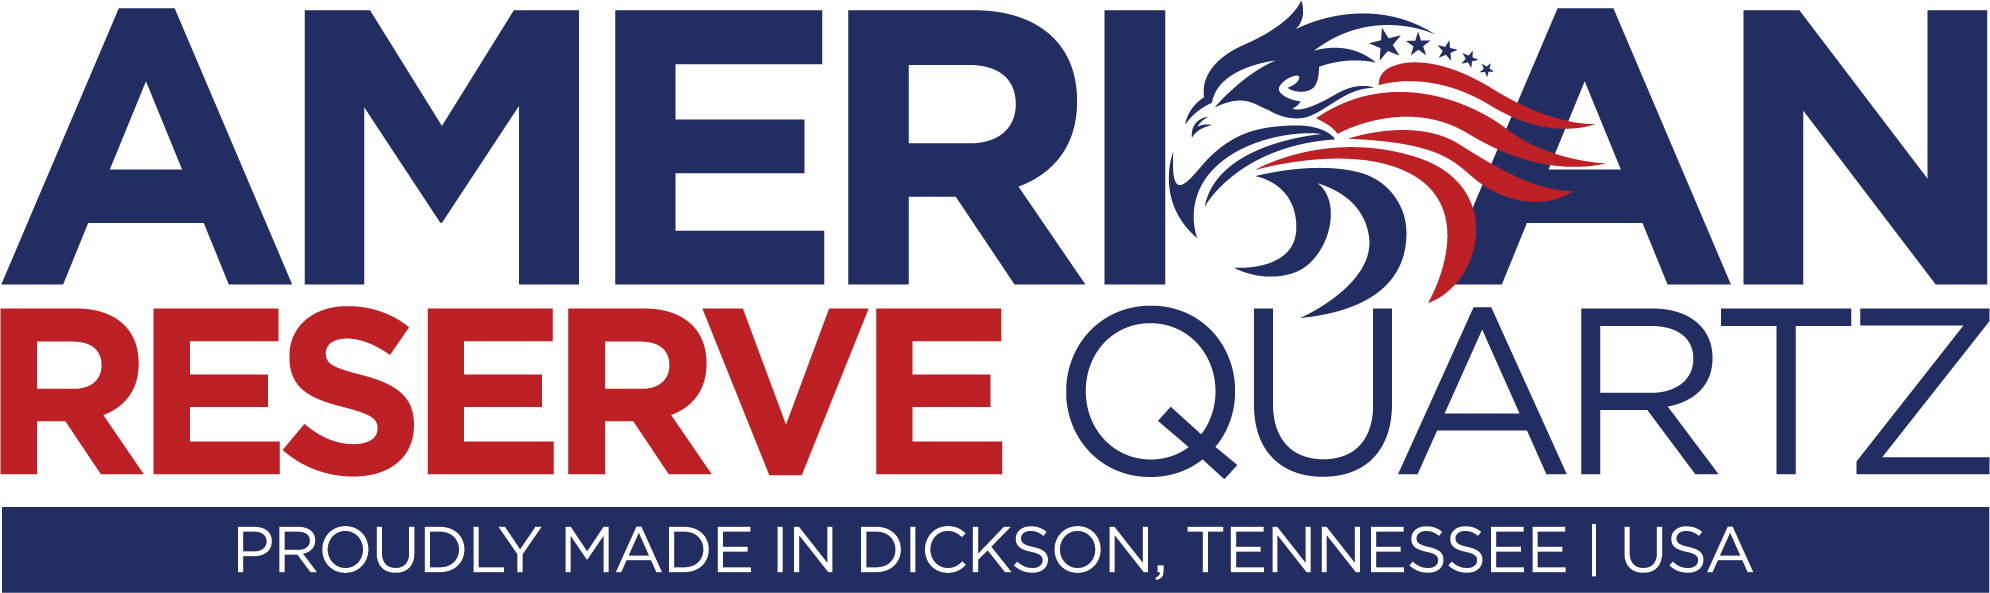 American Reserve Quartz - proudly made in Dickson, Tennessee, USA